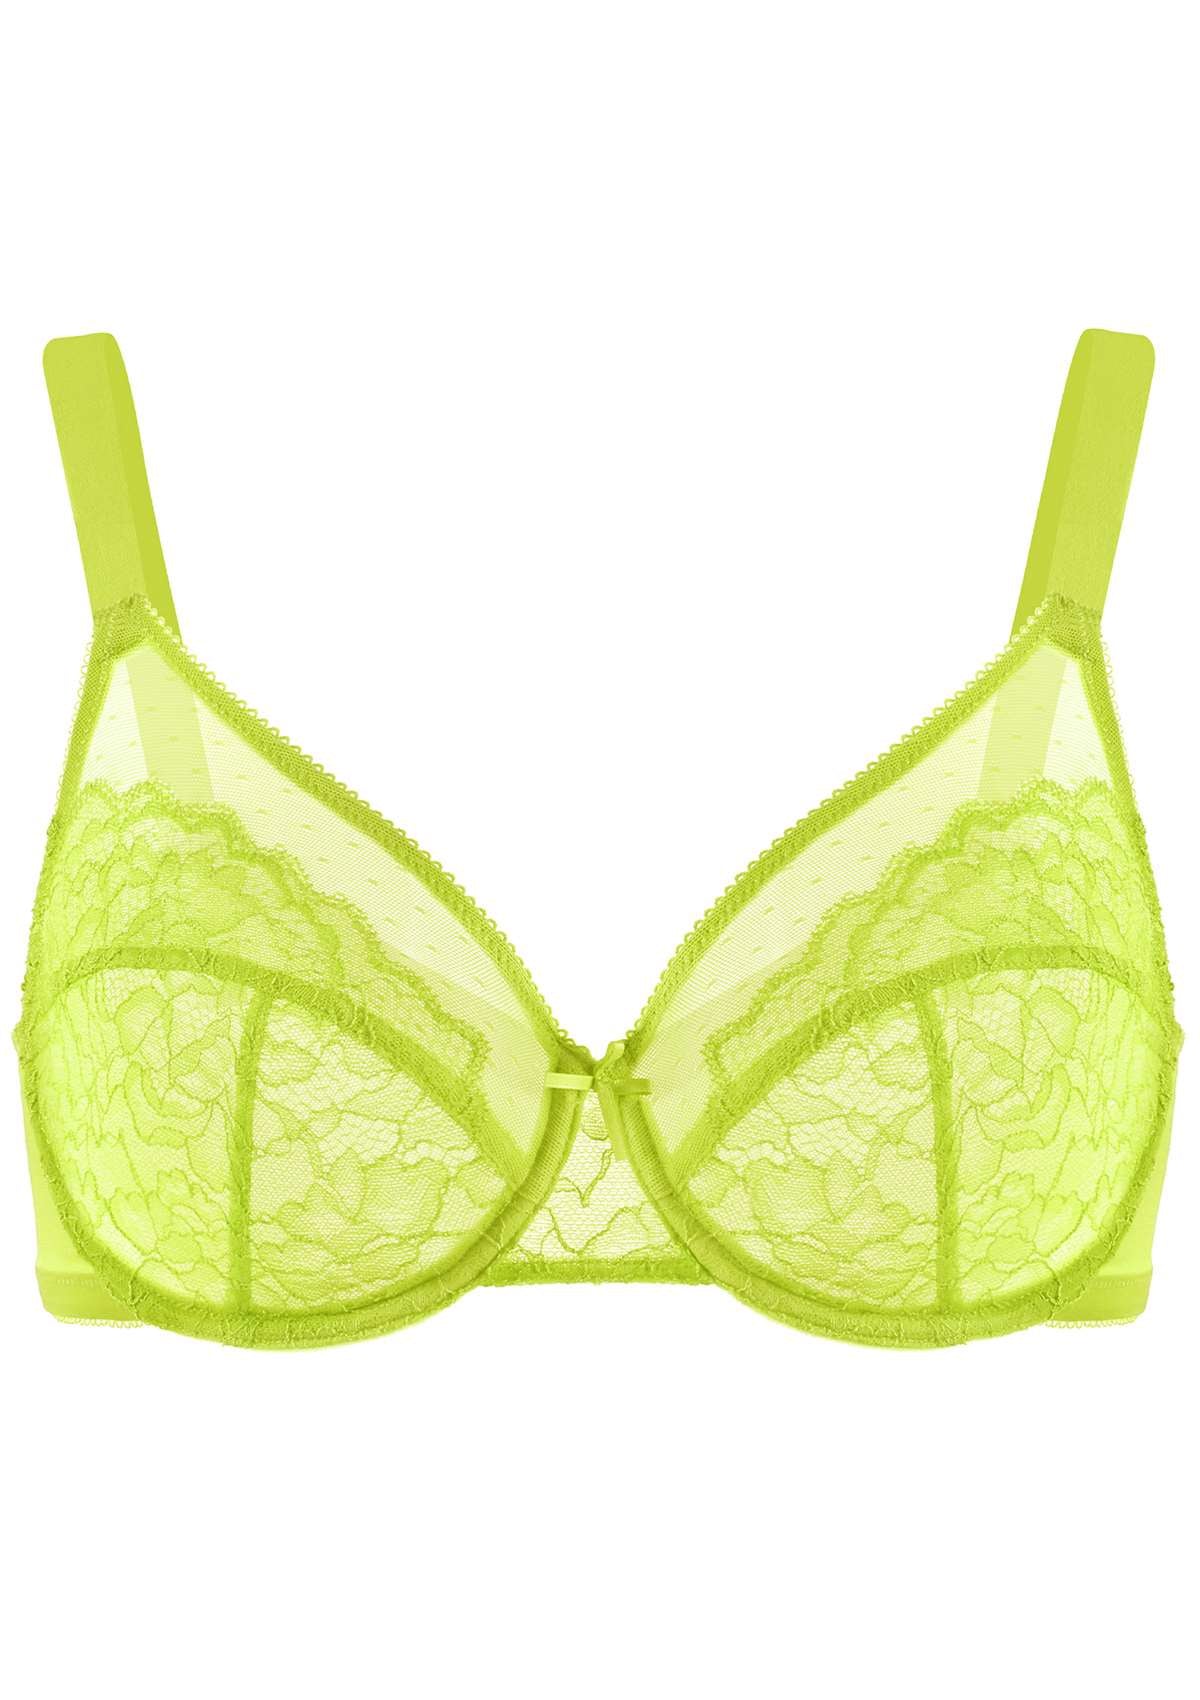 HSIA Enchante Full Cup Minimizing Bra: Supportive Unlined Lace Bra - Lime Green / 40 / G